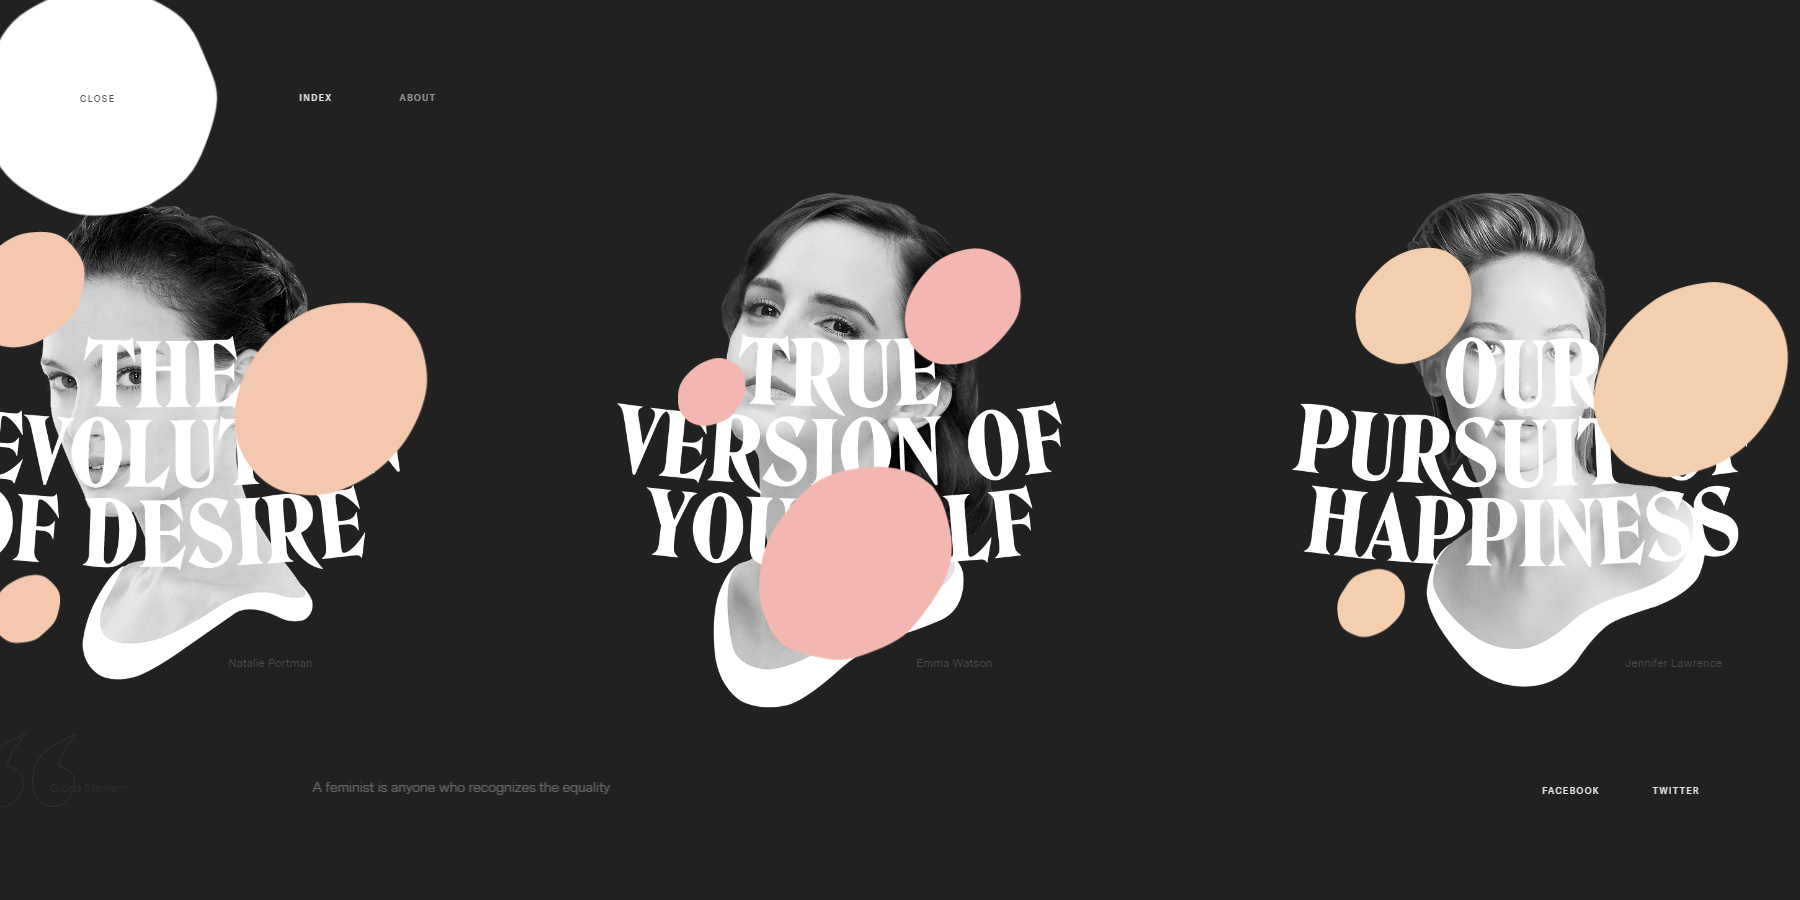 Beyond Beauty - Website of the Day